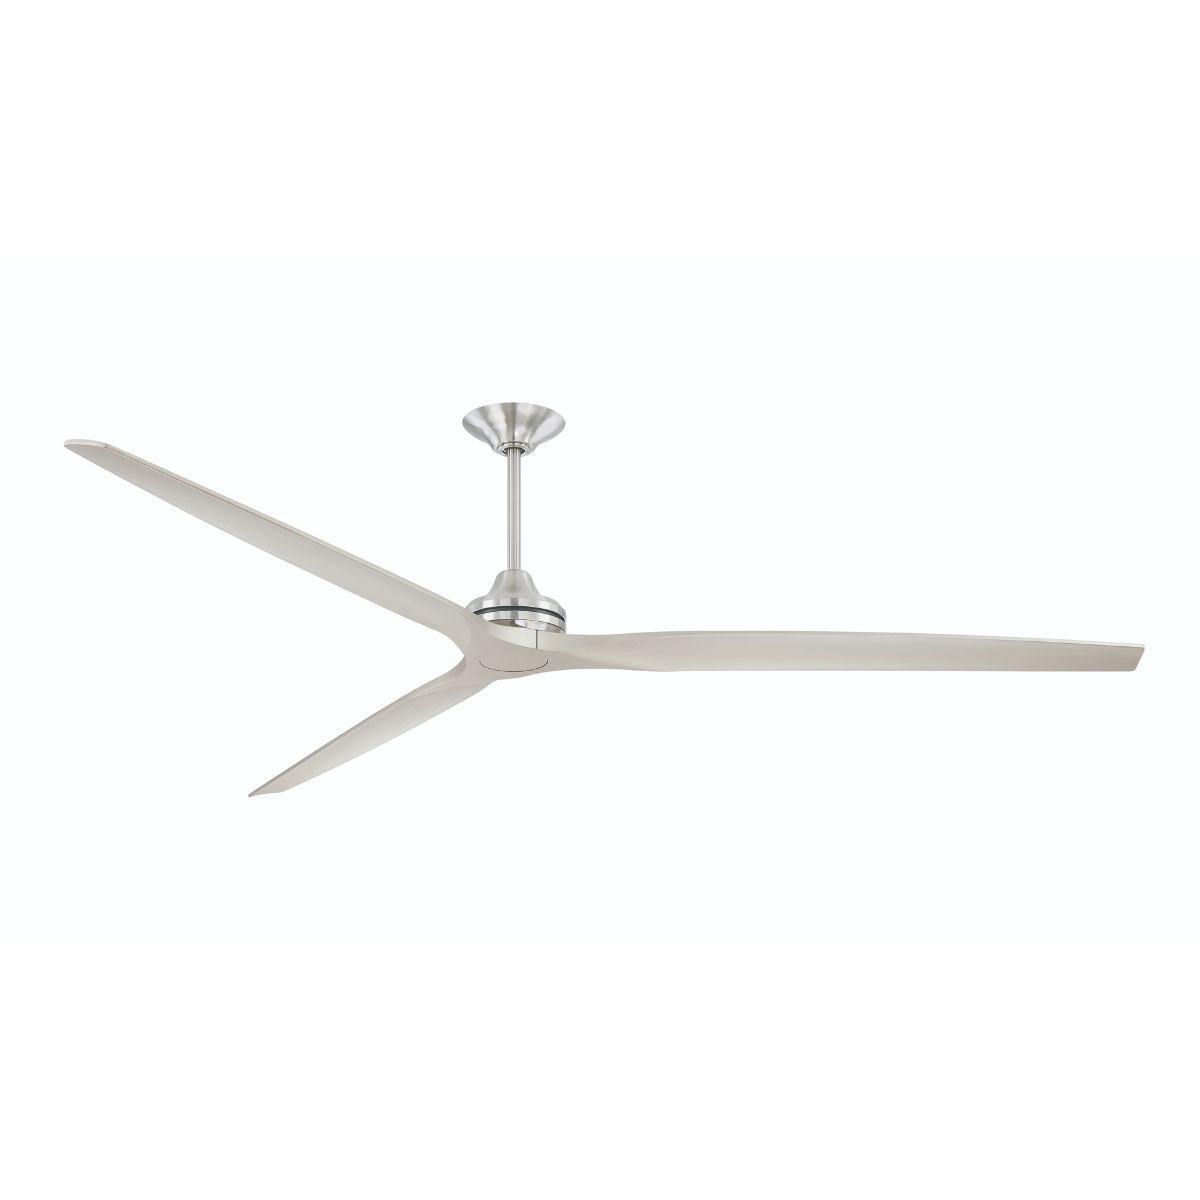 Spitfire DC Outdoor Ceiling Fan Motor With Remote, Set of 3 Blades Sold Separately